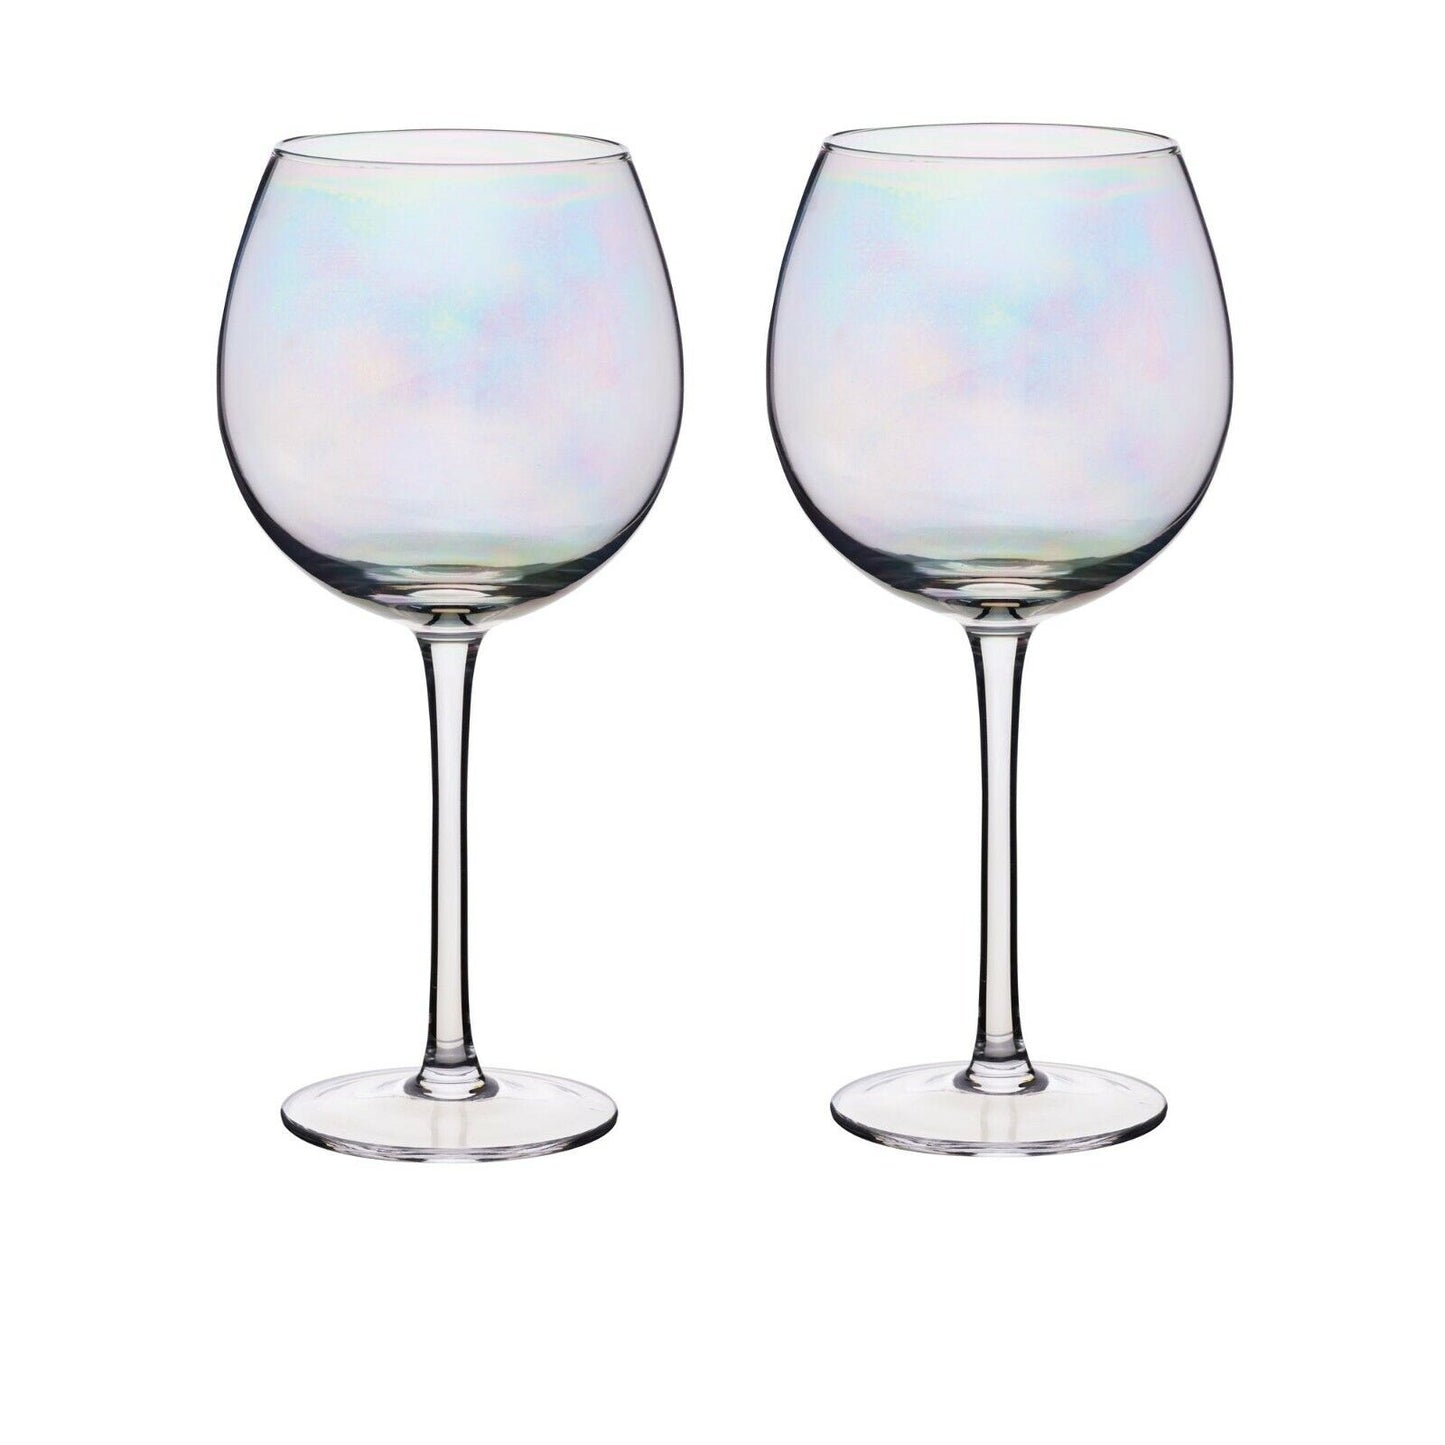 BarCraft Set of Two Iridescent Gin Glasses